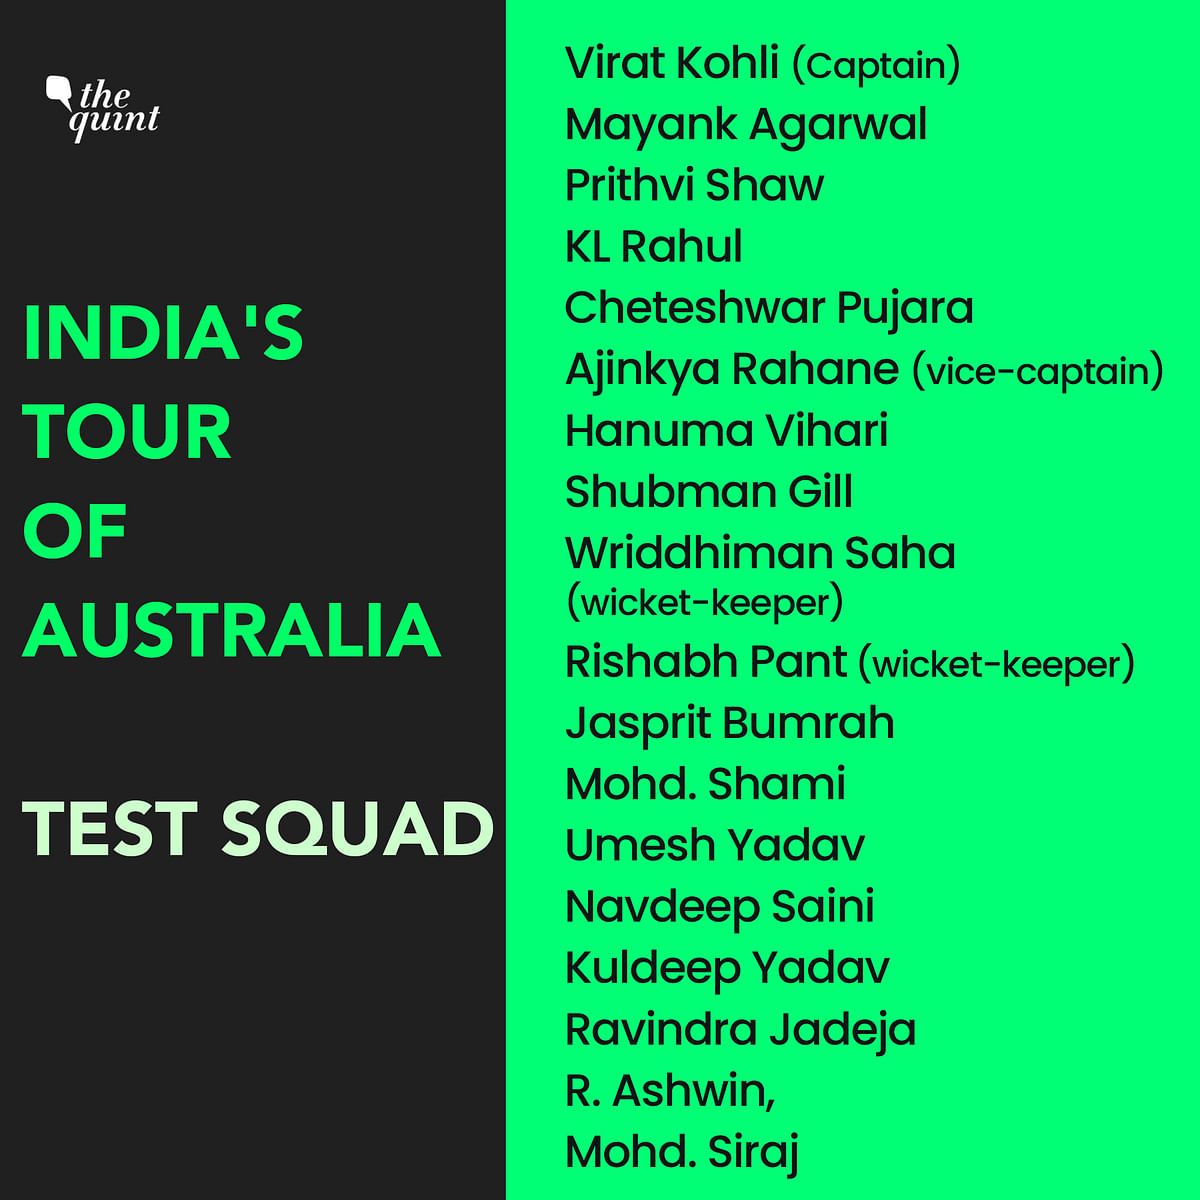 BCCI has announced India’s squad for the upcoming tour of Australia.